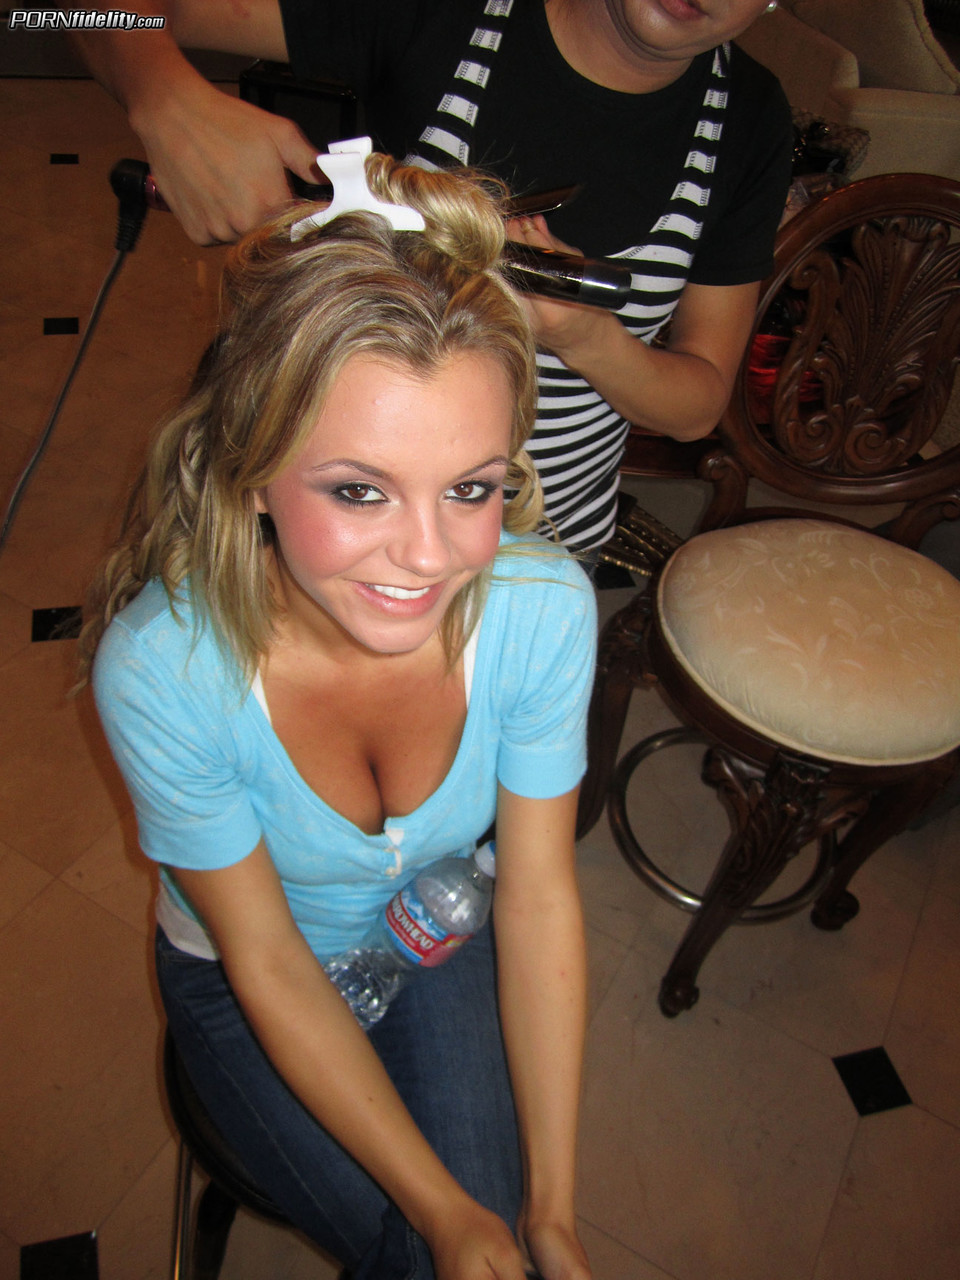 Attractive women Bree Olson & Kelly Madison strip together and pose for camera порно фото #425364725